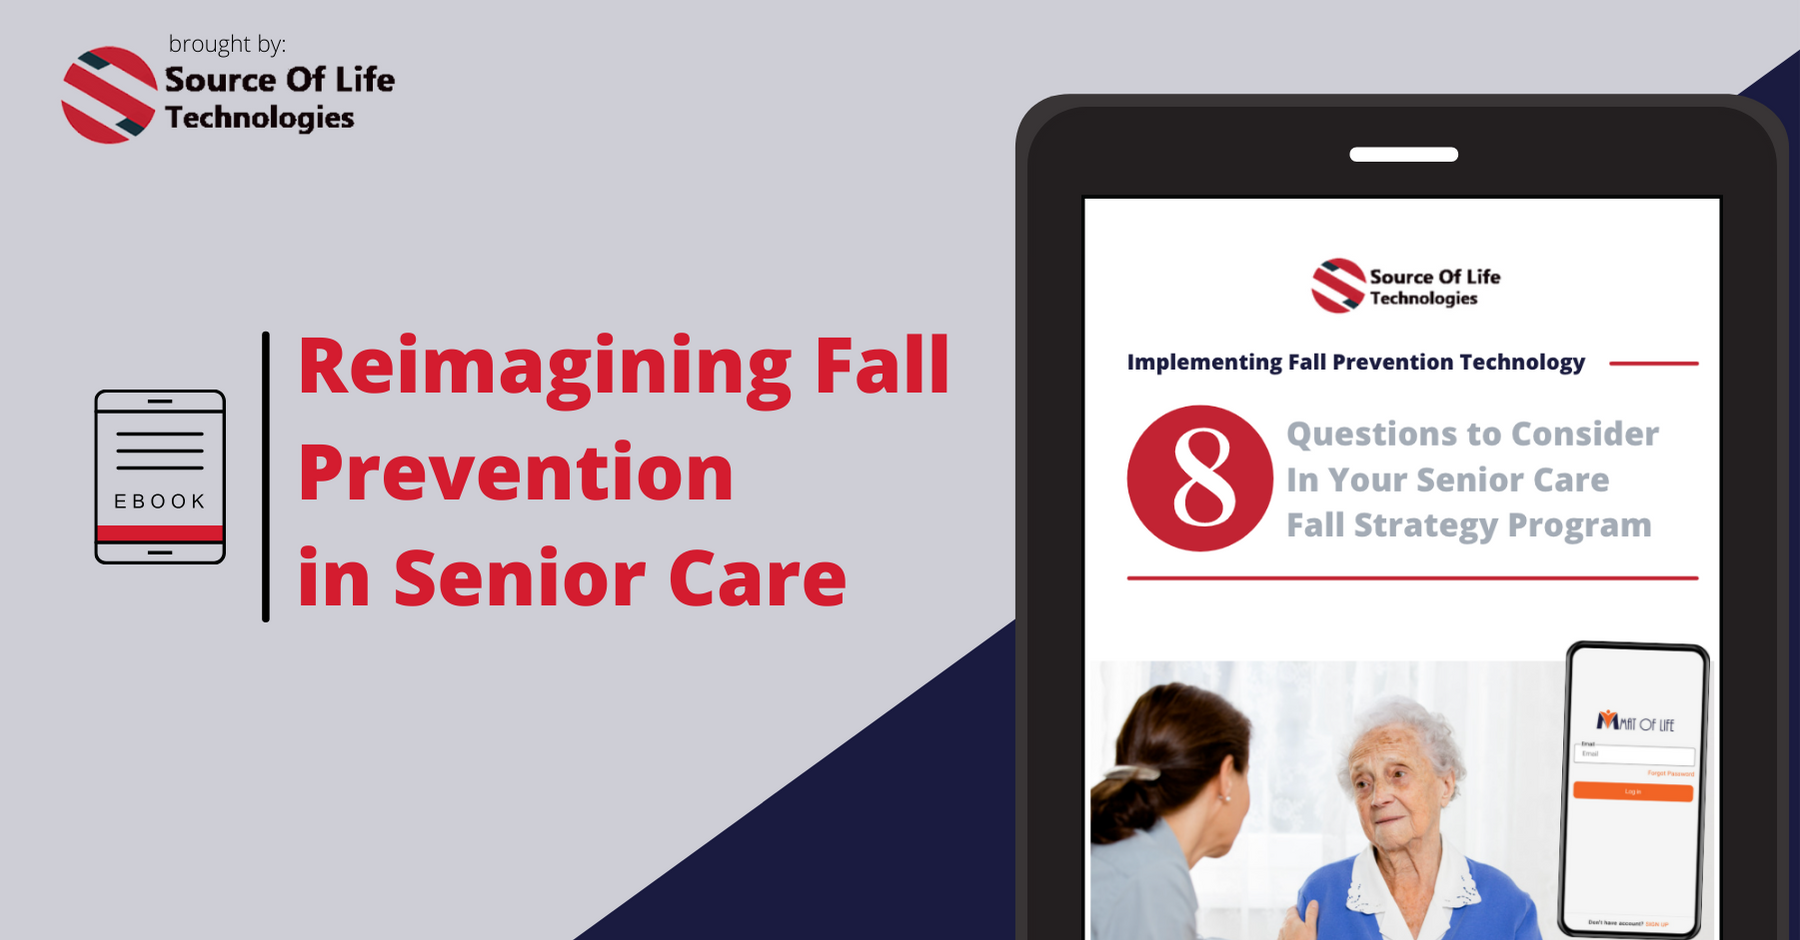 Reimagining Fall Prevention Technology: 8 Questions to Consider In Your Senior Care Fall Strategy Program